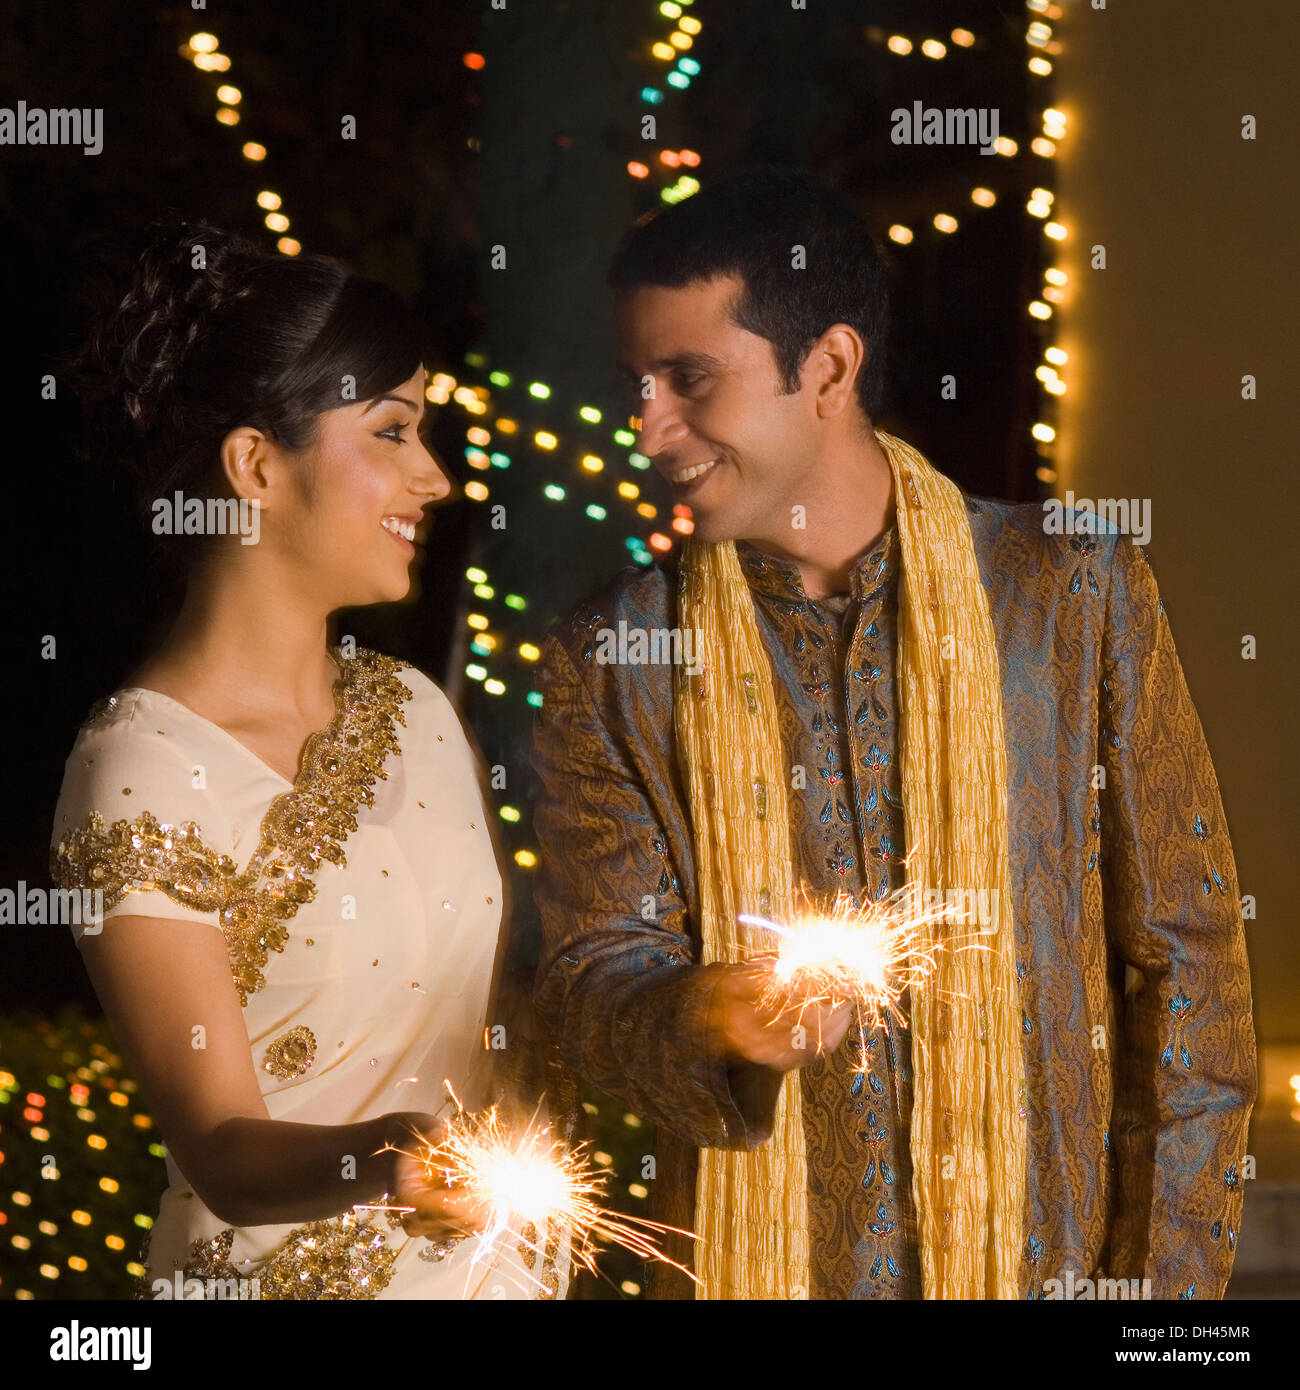 Diwali 2021: Best Celebrity Couple Looks From Bollywood